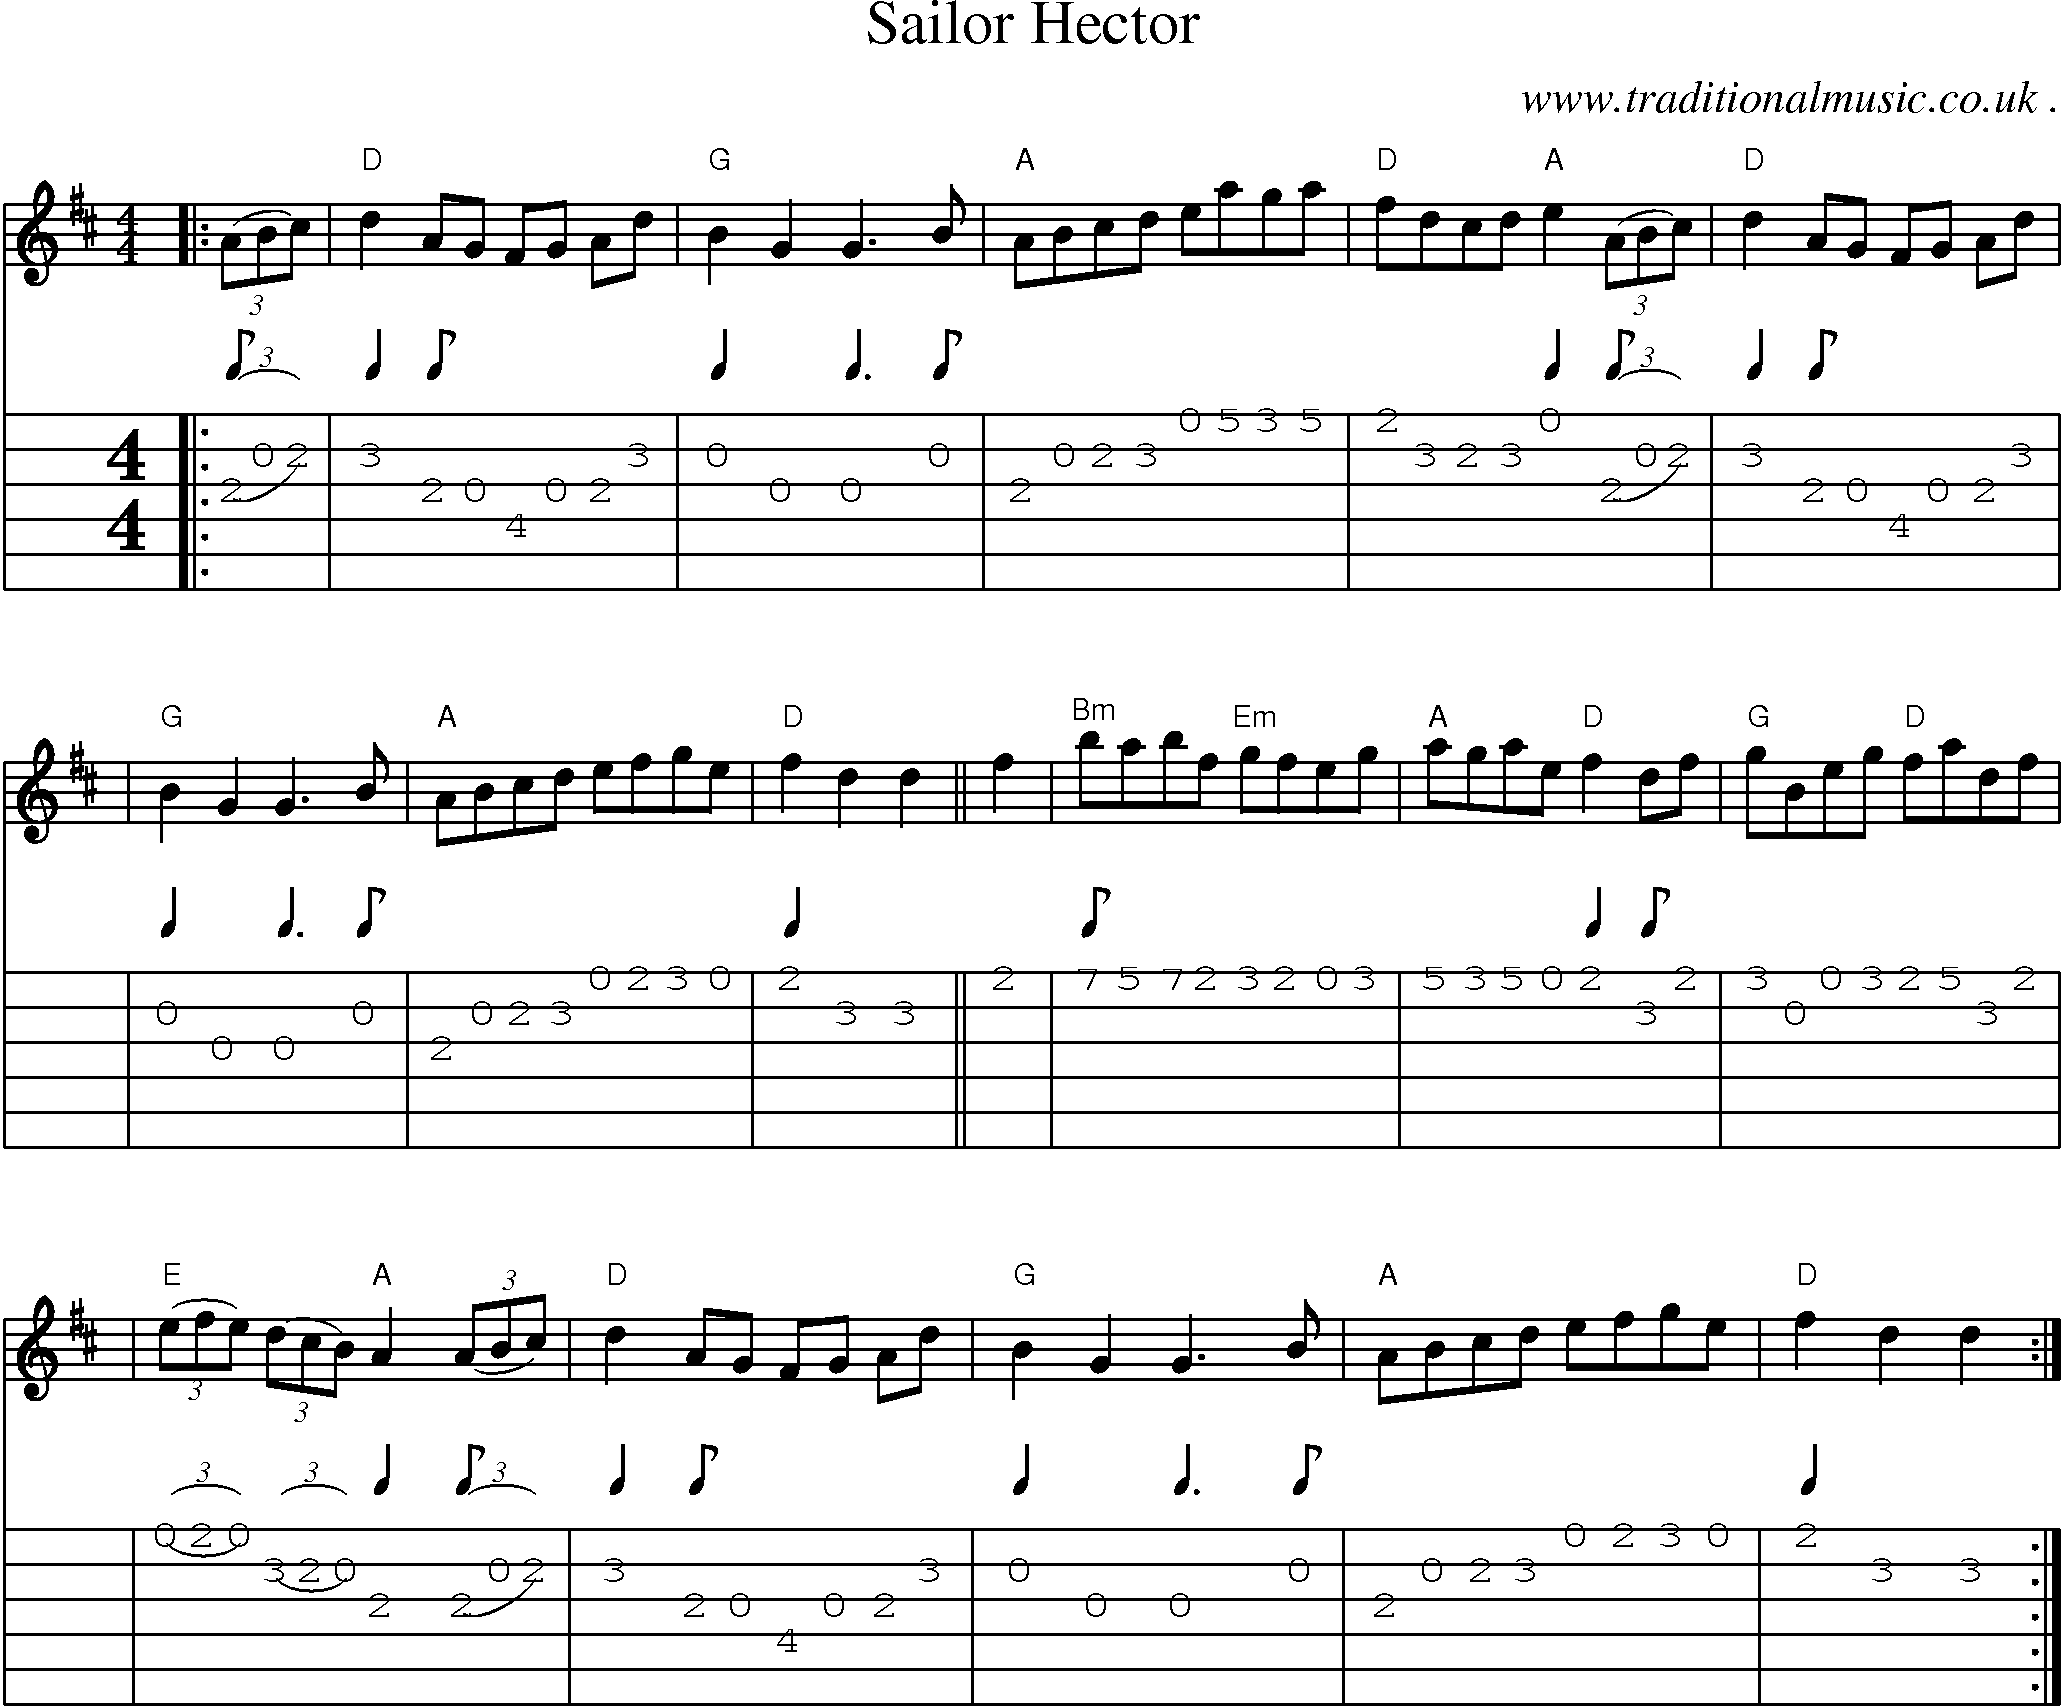 Sheet-music  score, Chords and Guitar Tabs for Sailor Hector